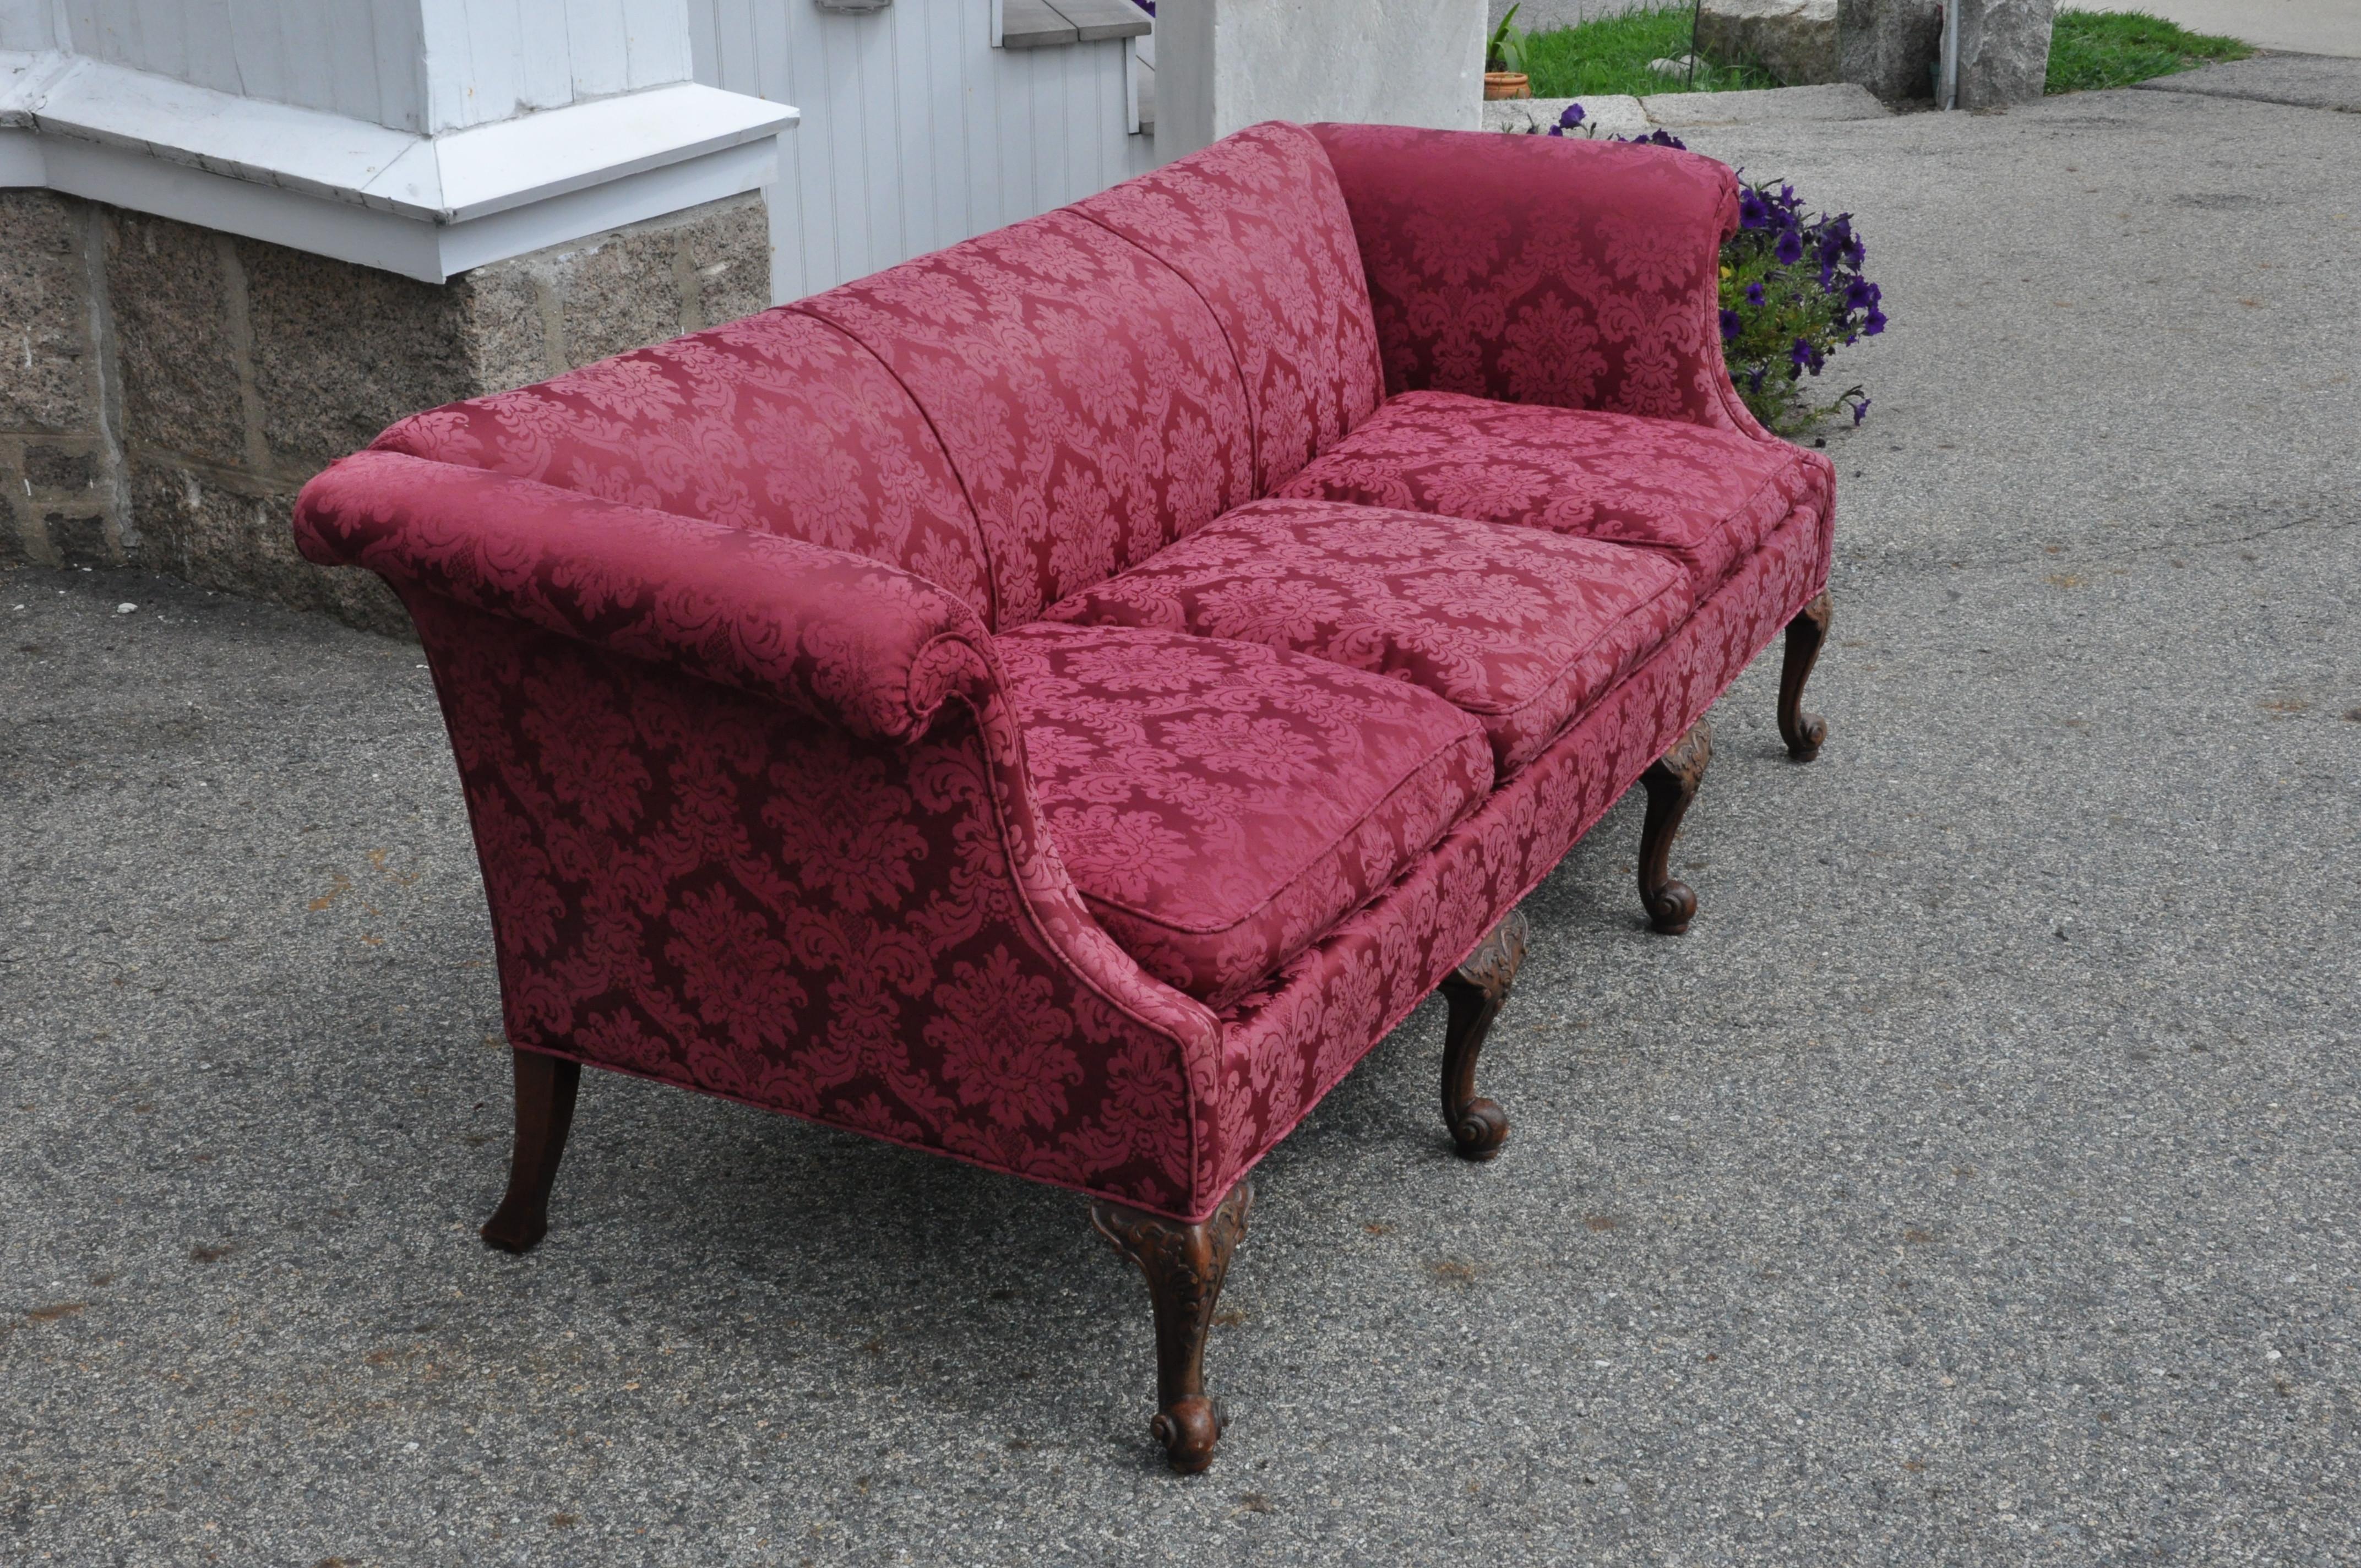 18th century style Irish sofa. Well carved legs and in an Irish square back form. Good walnut legs carved in George II style

Would benefit with a period re-upholstering approach. Fabric is clean and stable but we recommend redo.